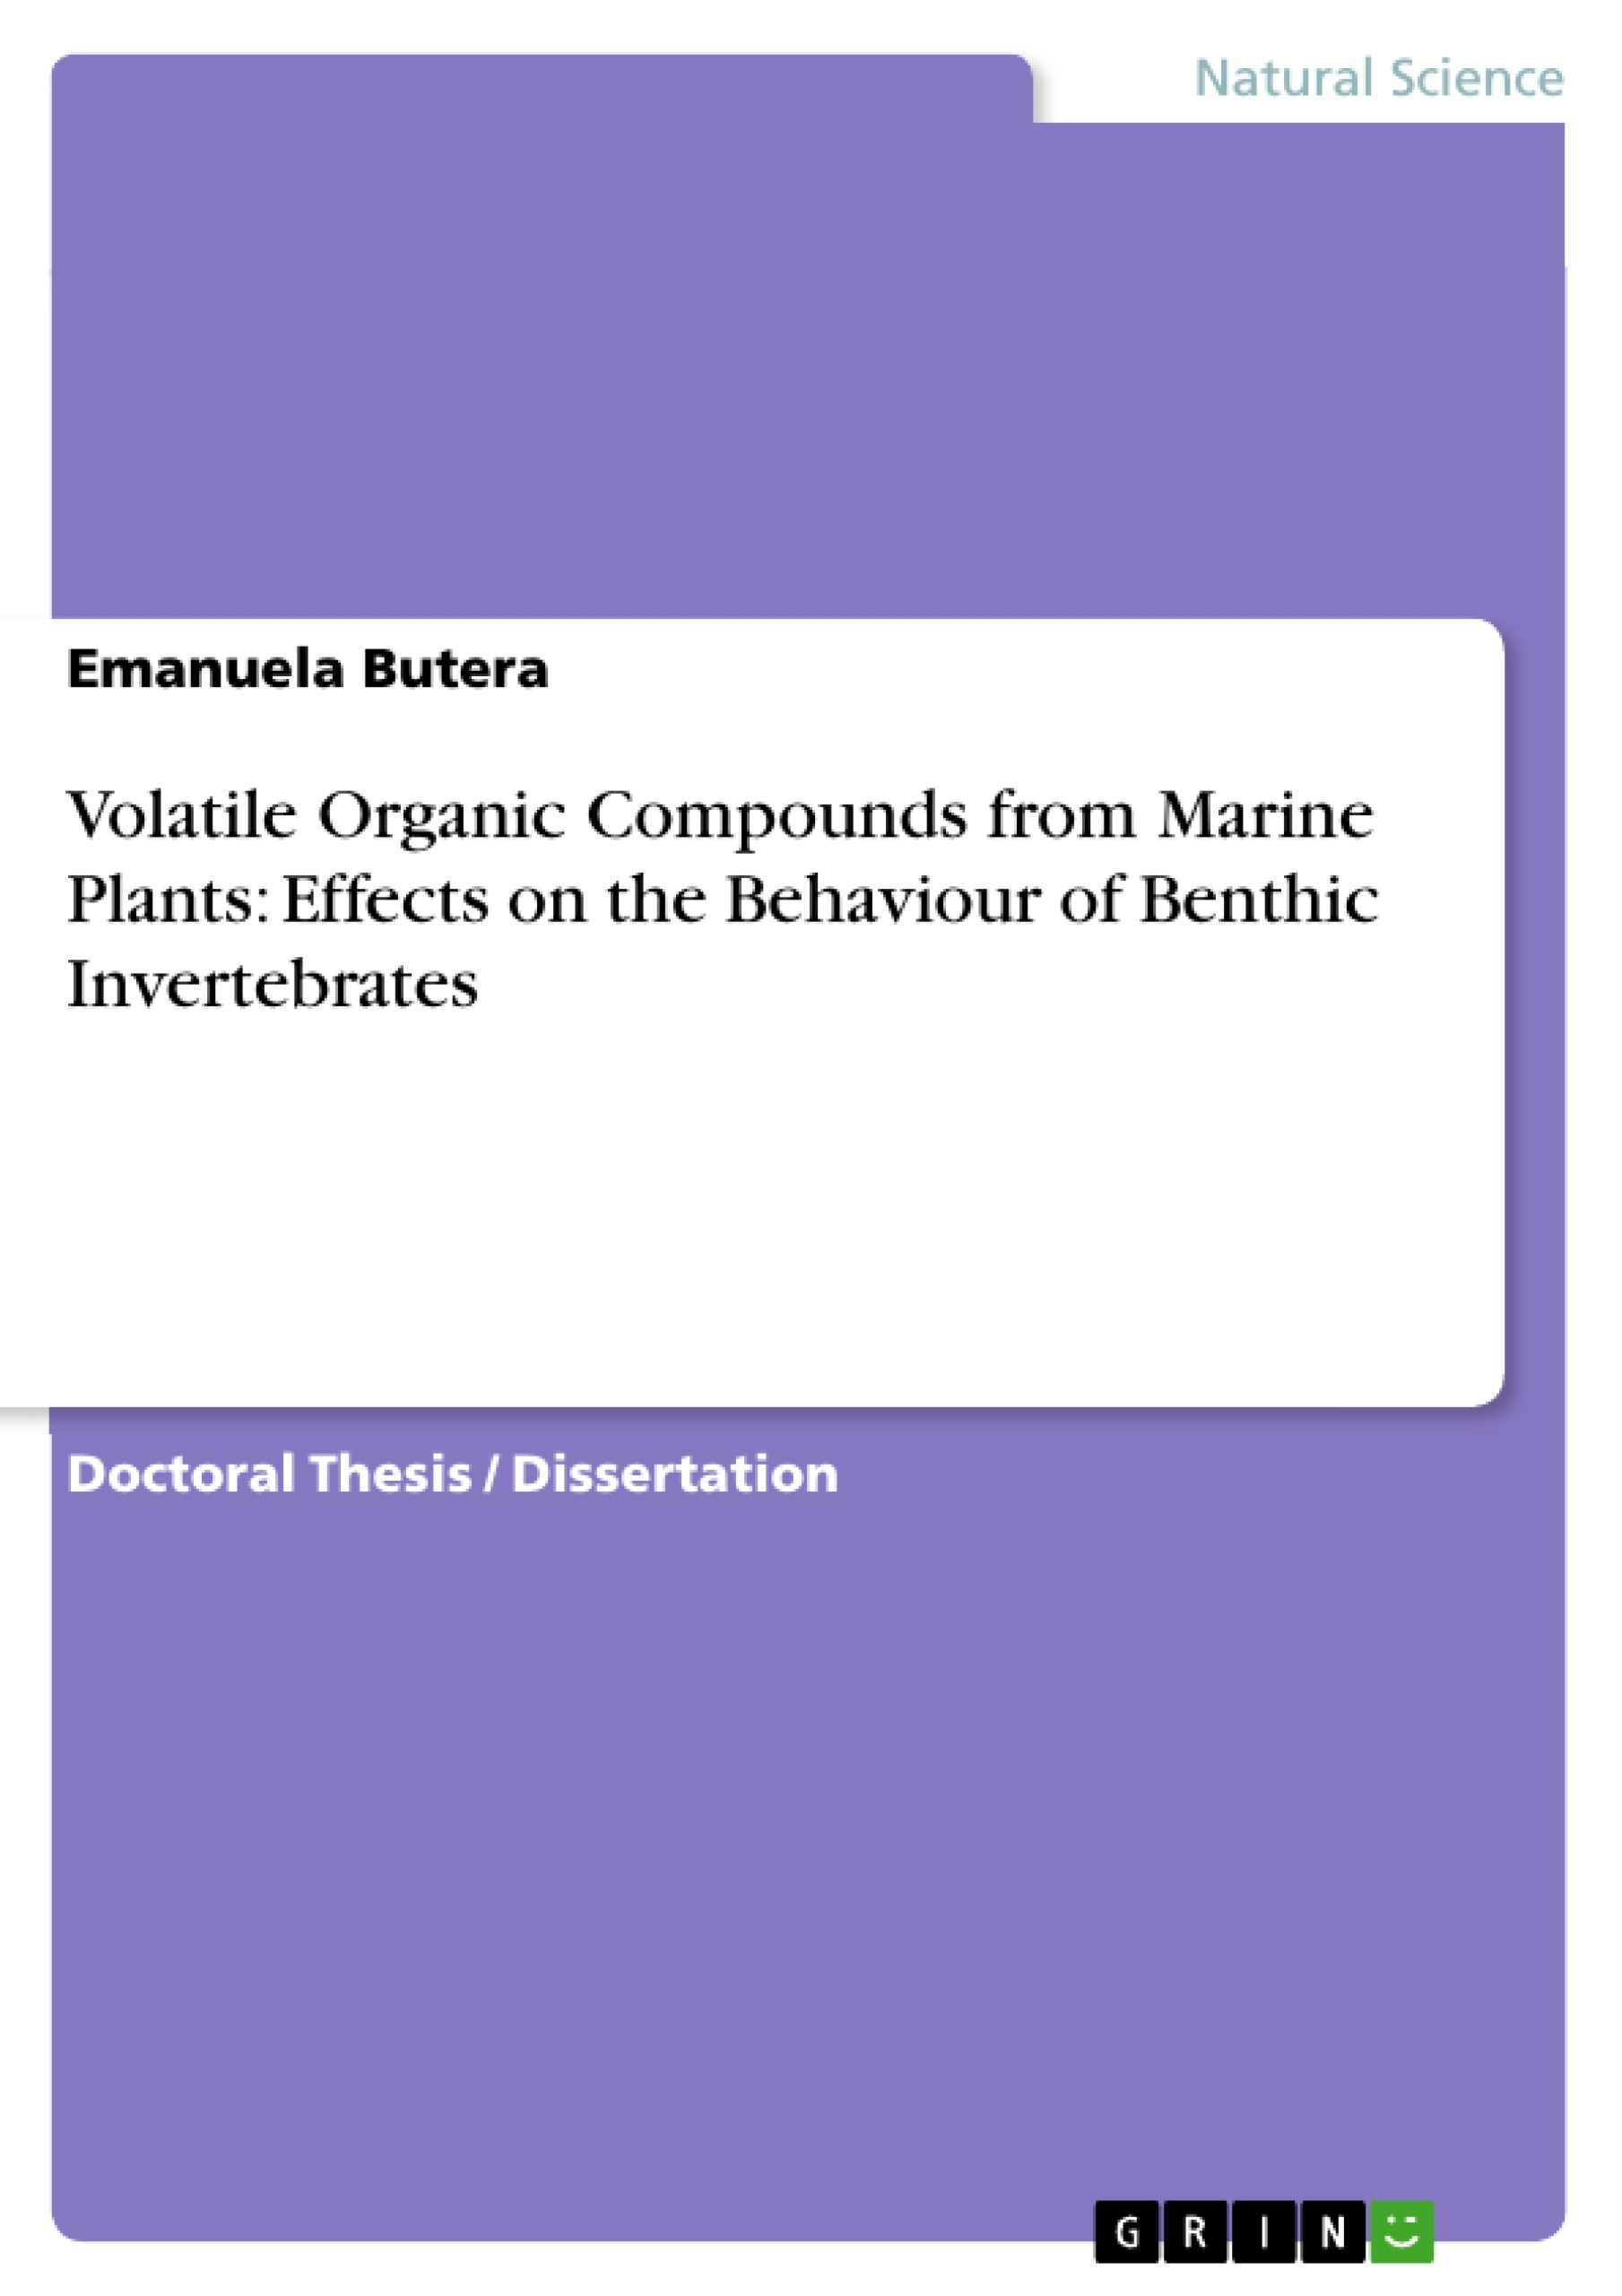 Título: Volatile Organic Compounds from Marine Plants: Effects on the Behaviour of Benthic Invertebrates